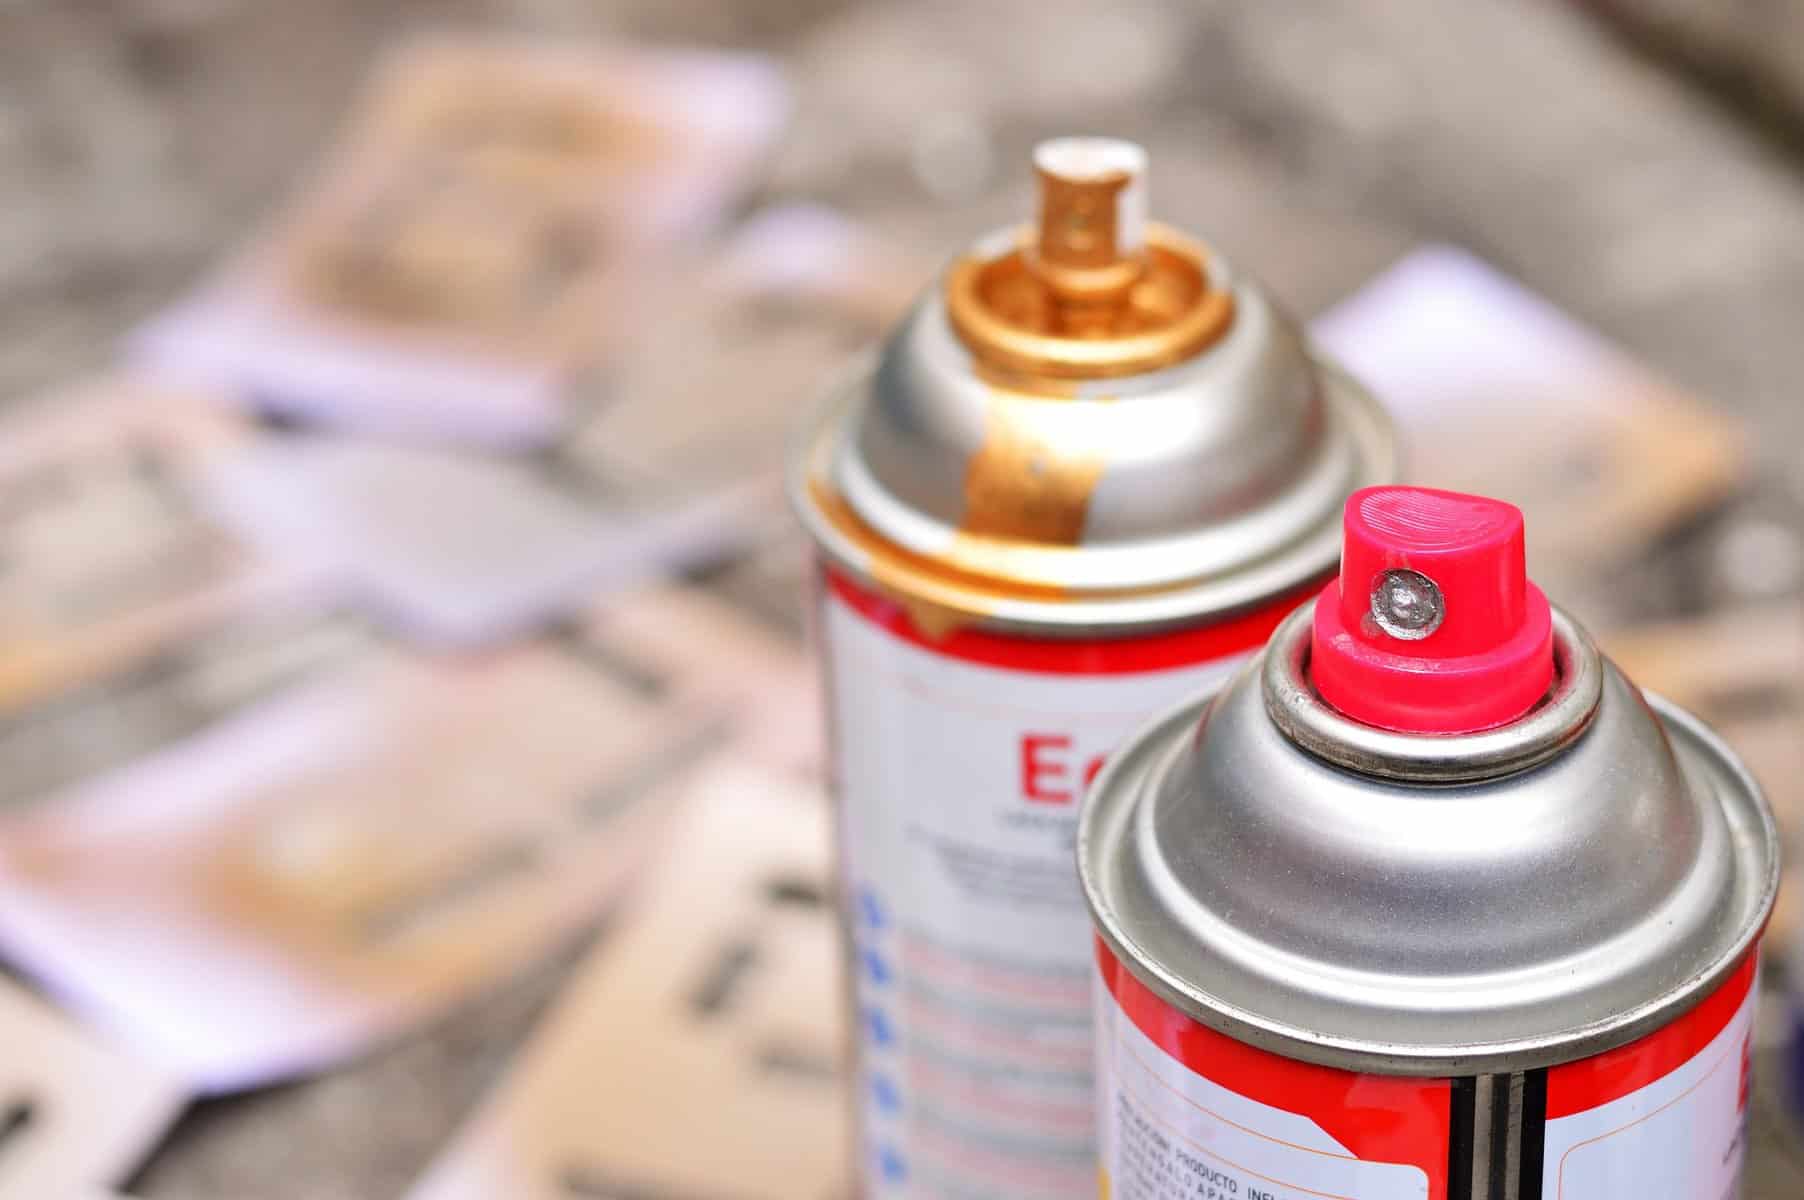 The tops of two spray paint cans are shown with blurred letter forms in the back.